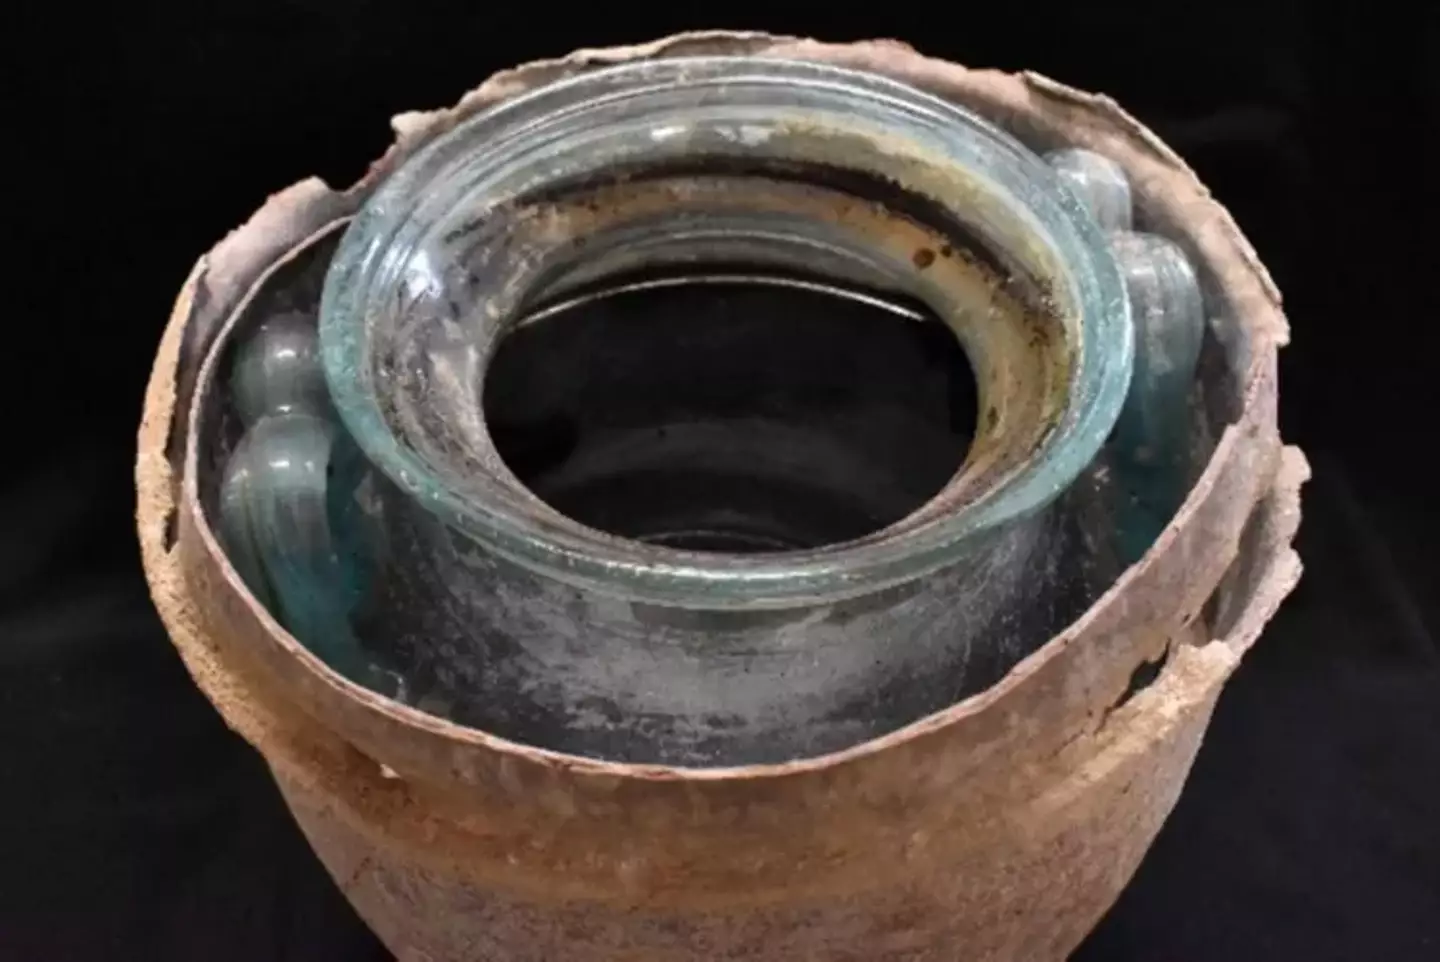 The world's oldest wine was discovered in an urn. (JUAN MANUEL ROMAN/ JOURNAL OF ARCHAEOLOGICAL SCIENCE)